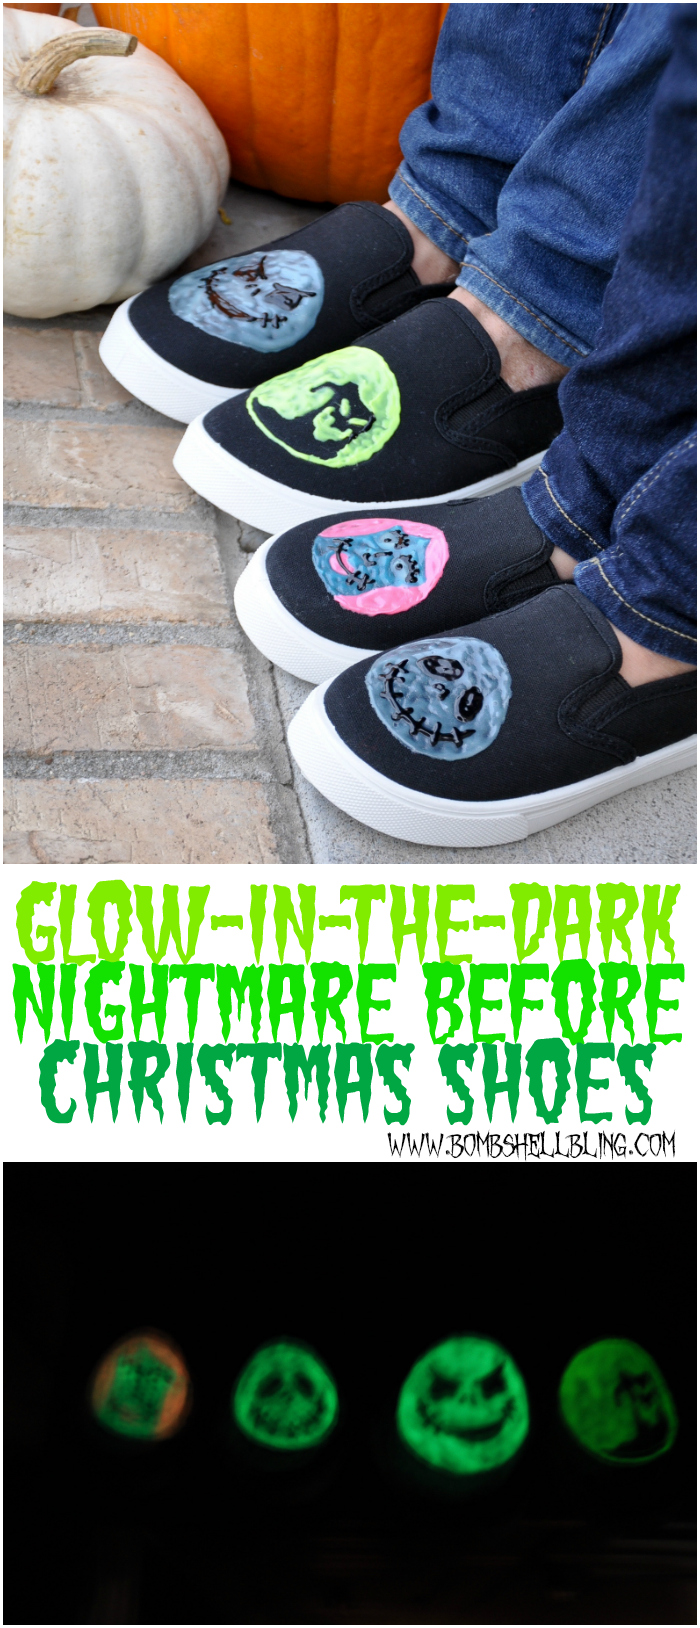 These glow-in-the-dark Nightmare Before Christmas shoes are the most adorable Halloween DIY ever!! I can't believe it's just puff paint!